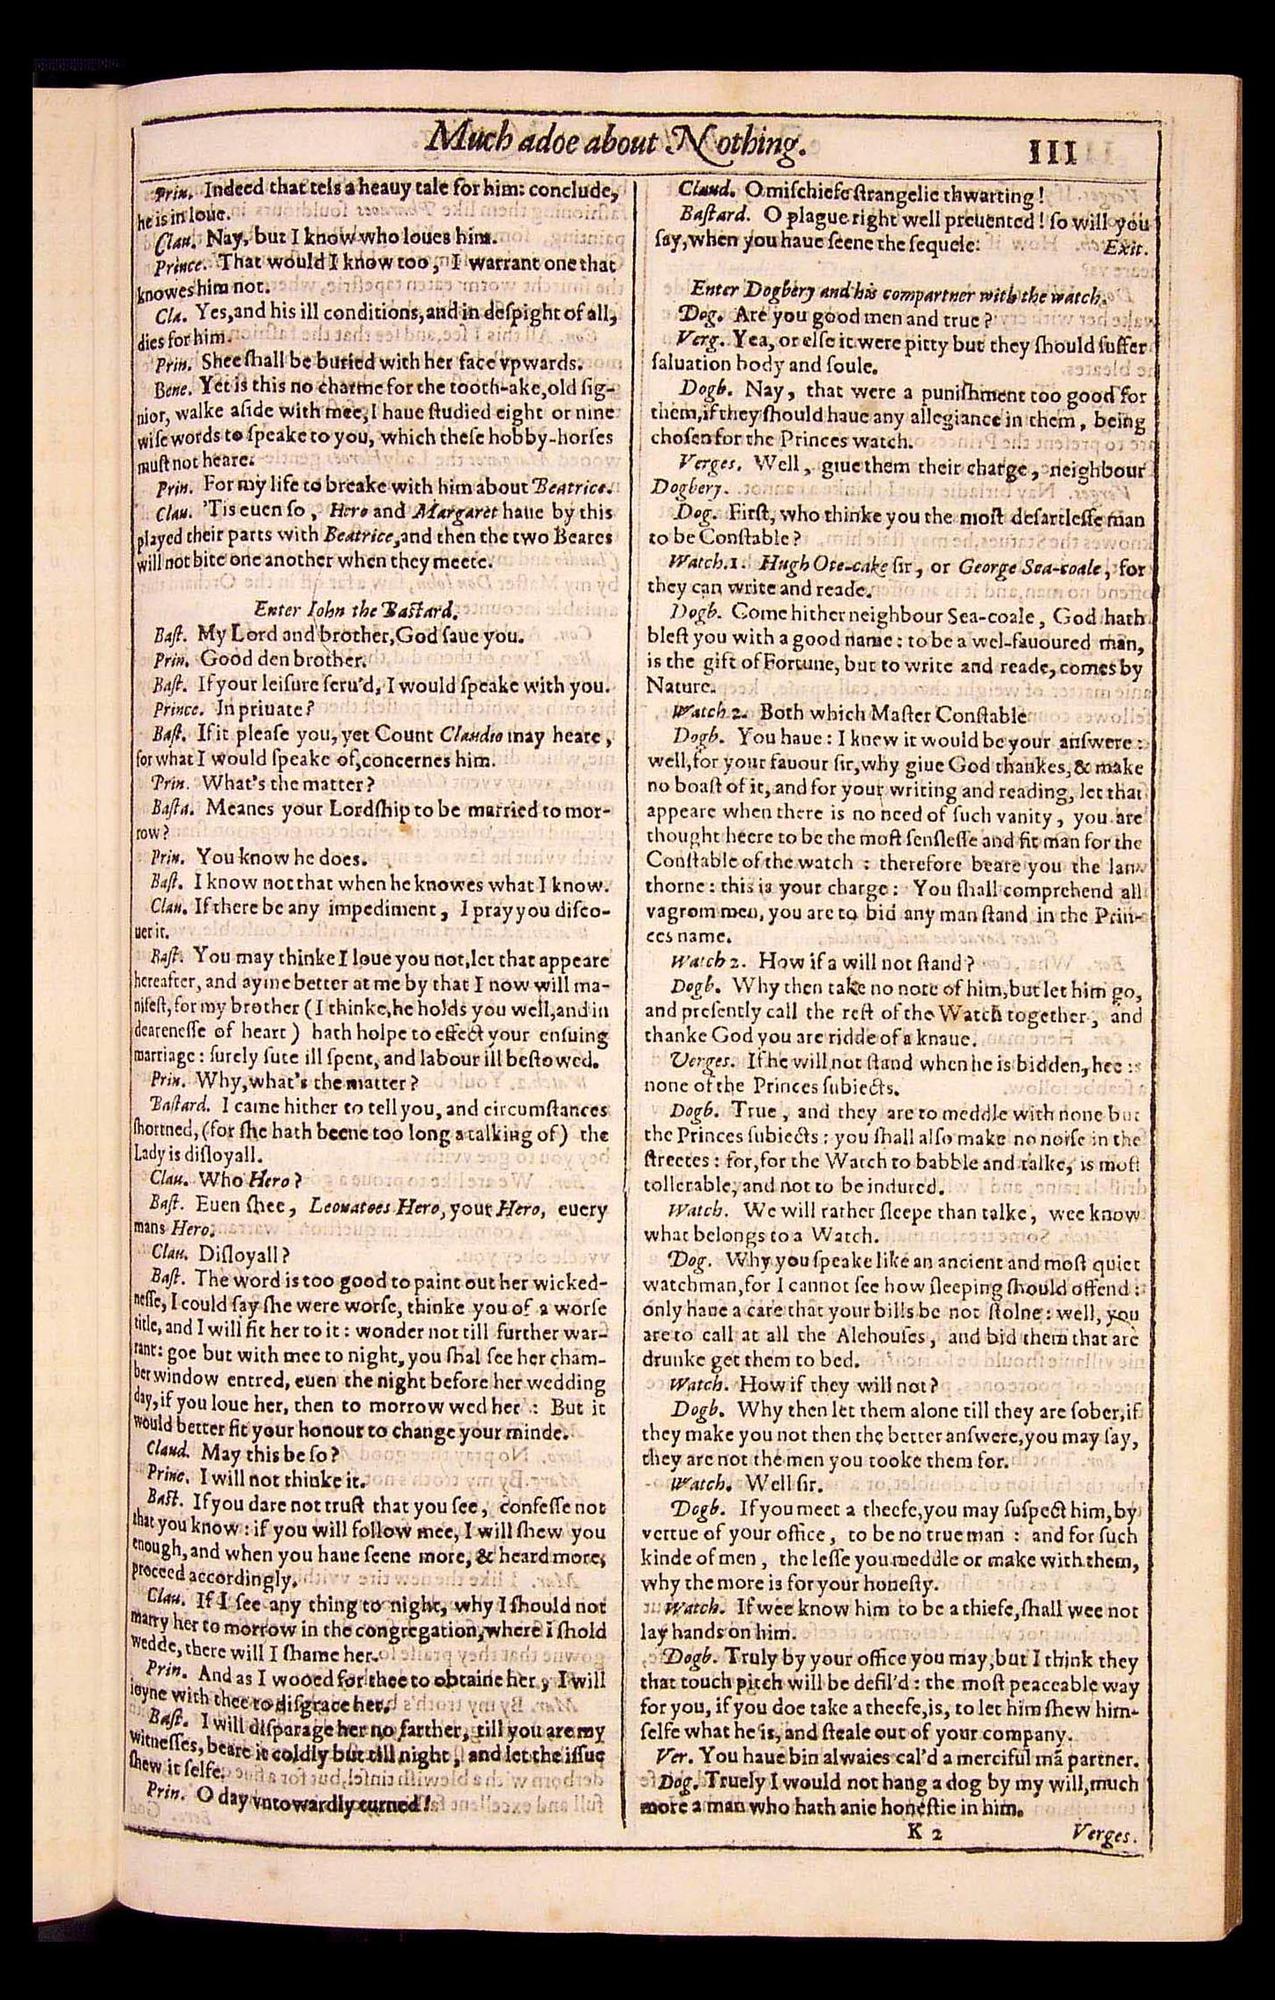 Image of page 129